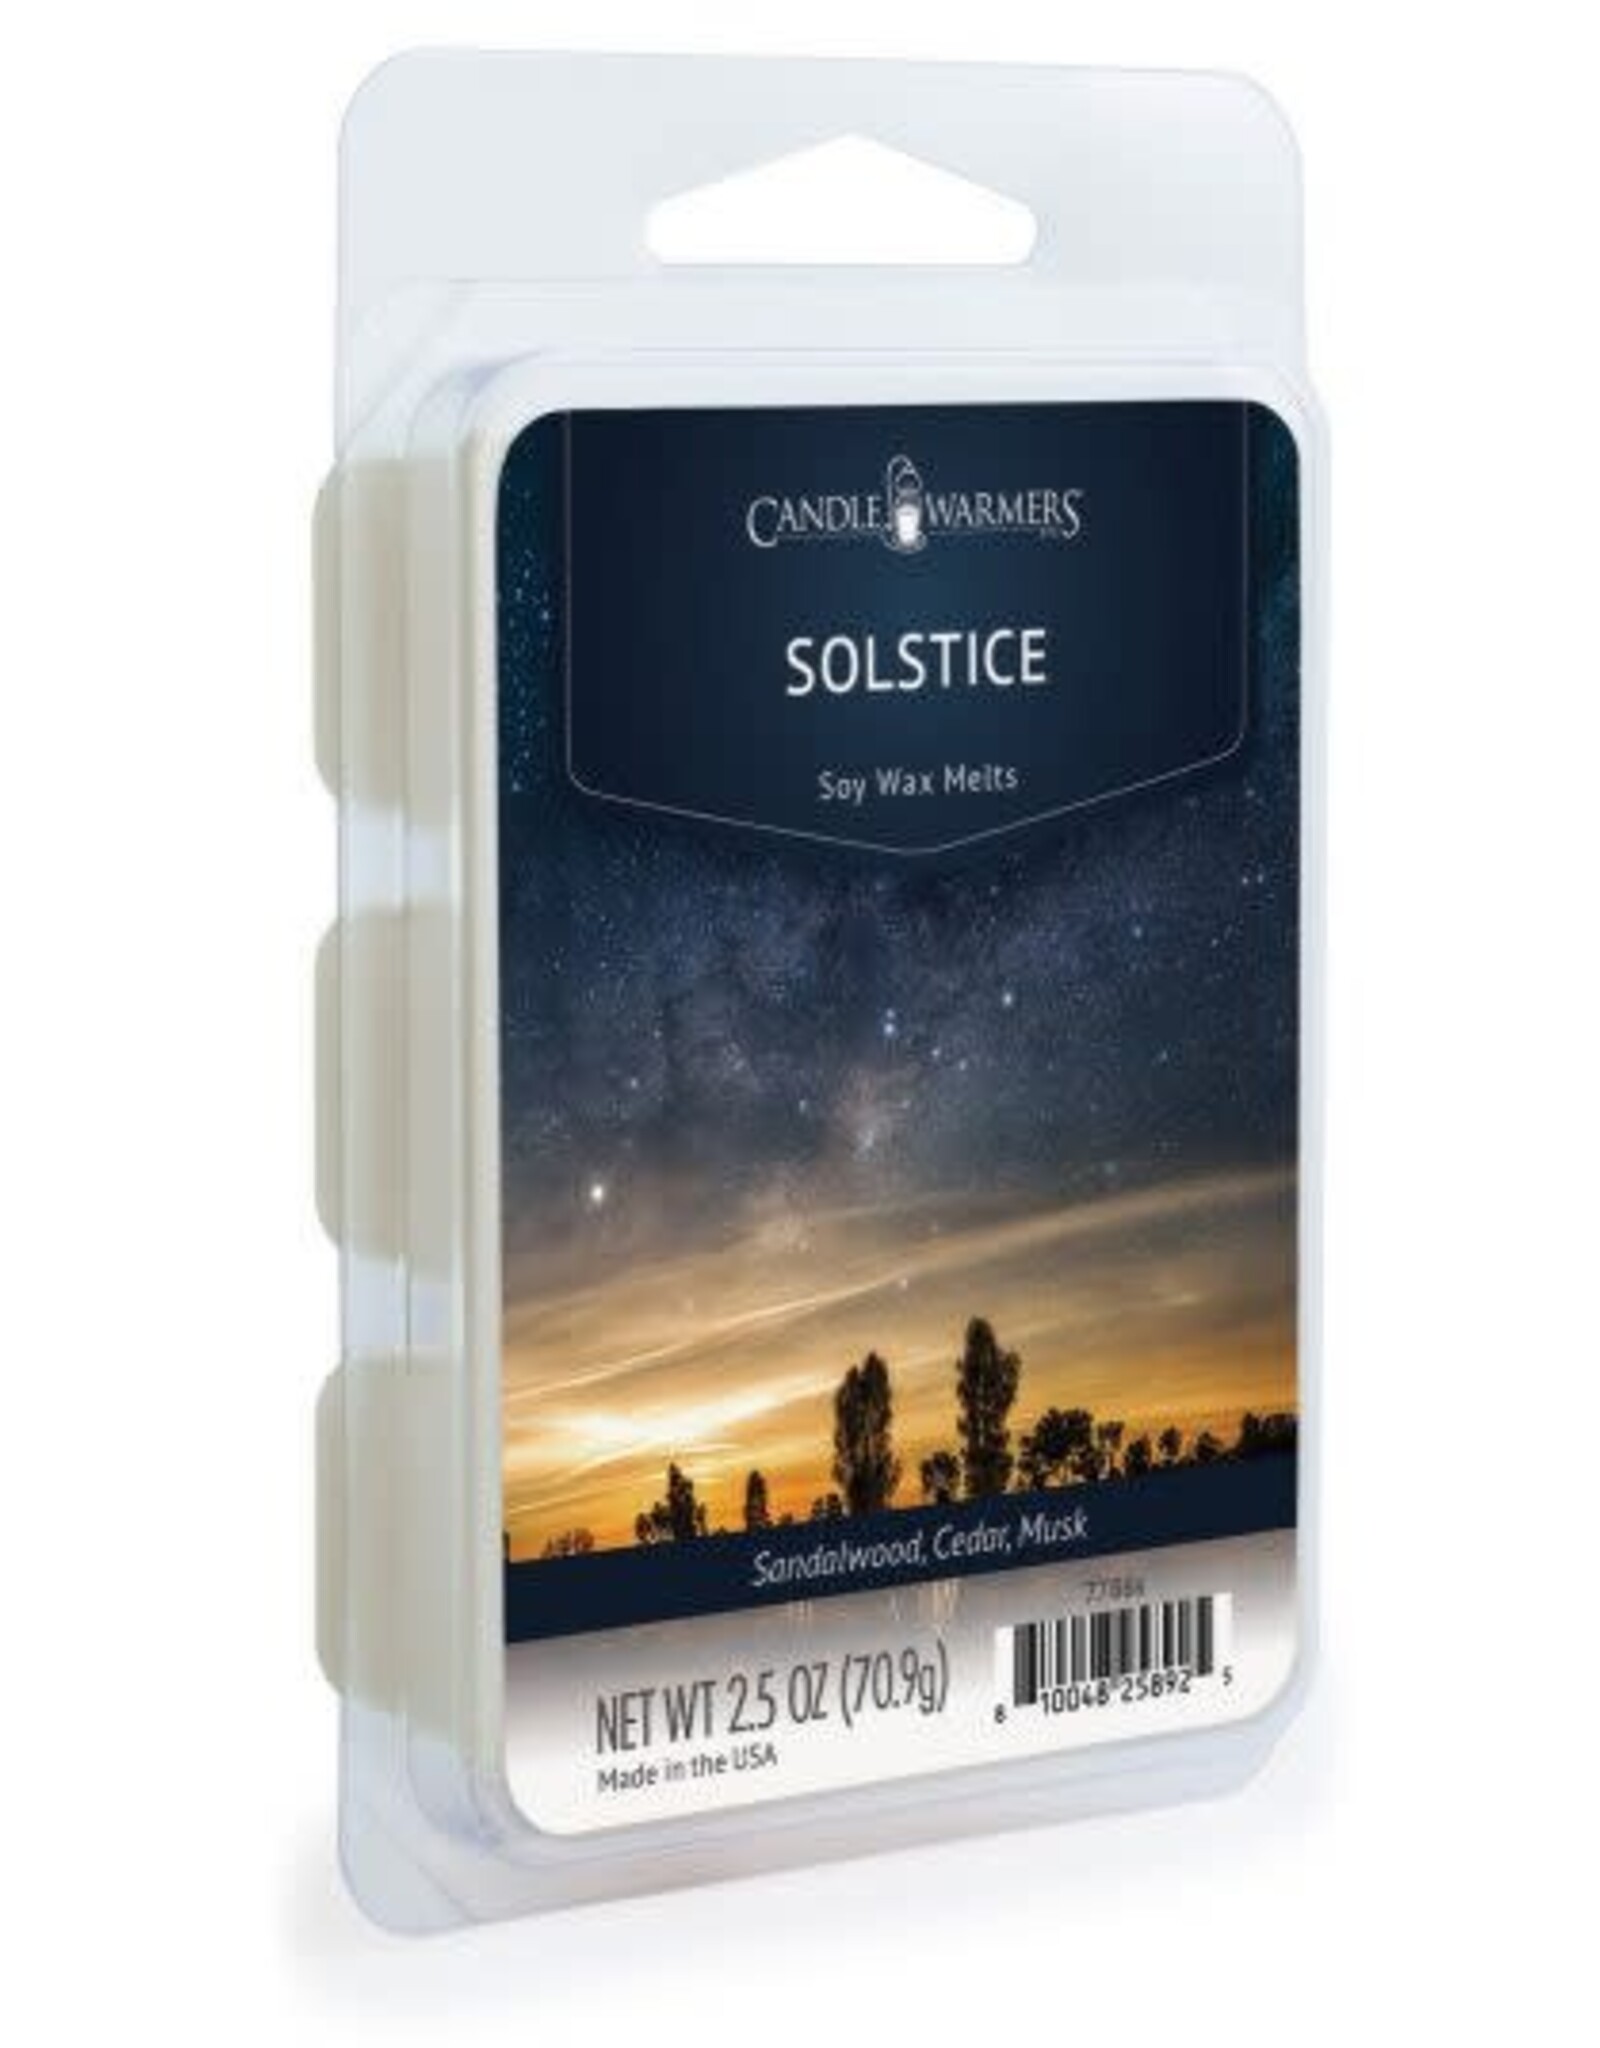 CLASSIC COLLECTION WAX MELTS - soy wax - Schoolhouse Earth